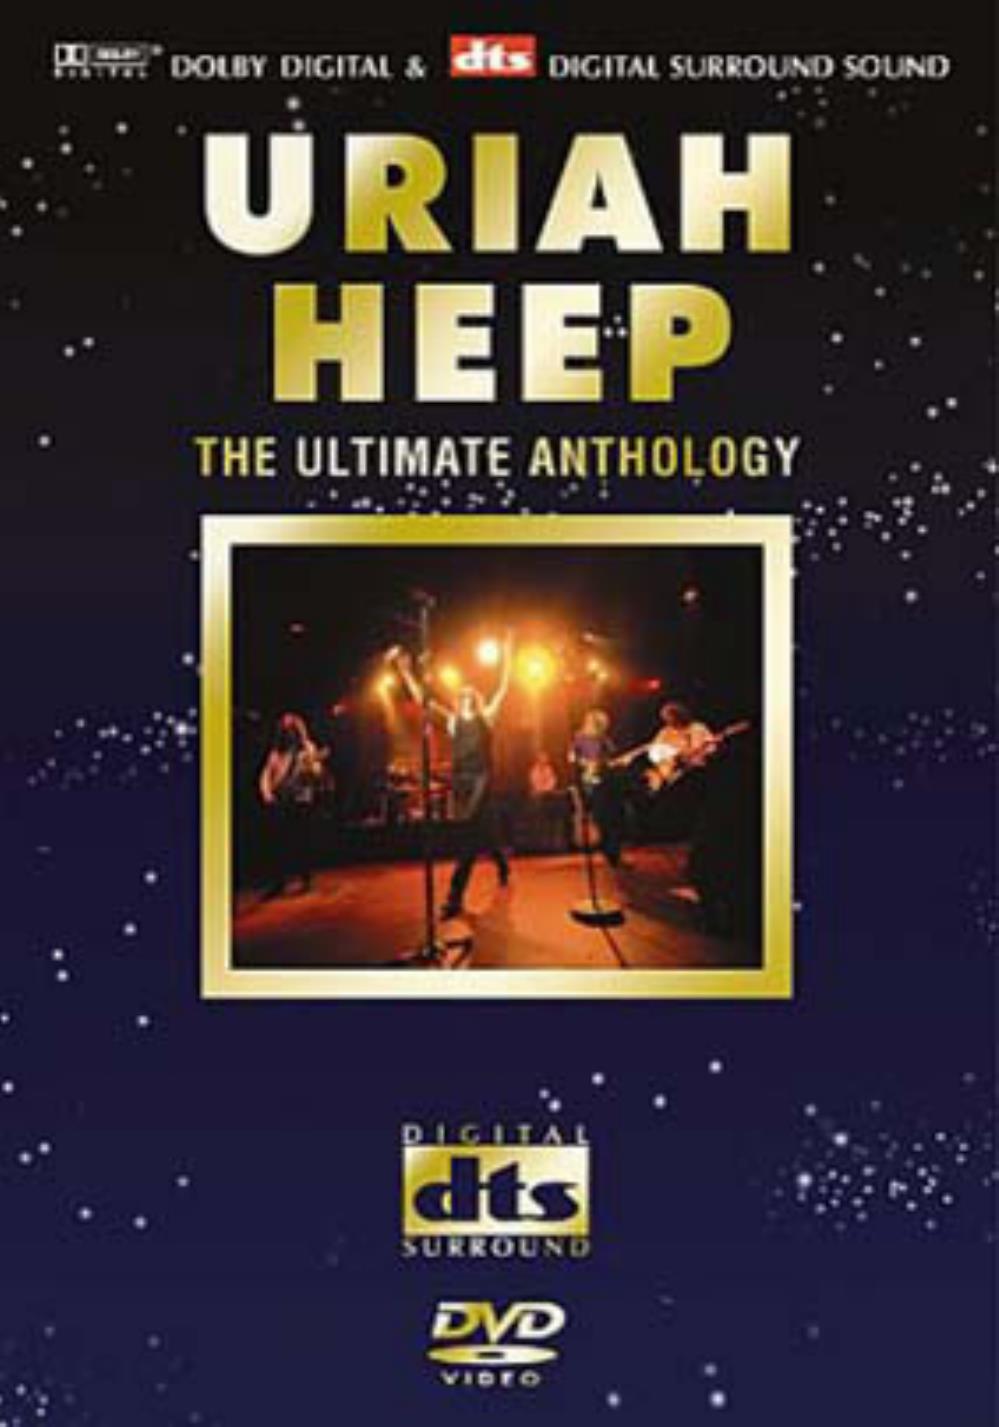 Uriah Heep - The Ultimate Anthology CD (album) cover